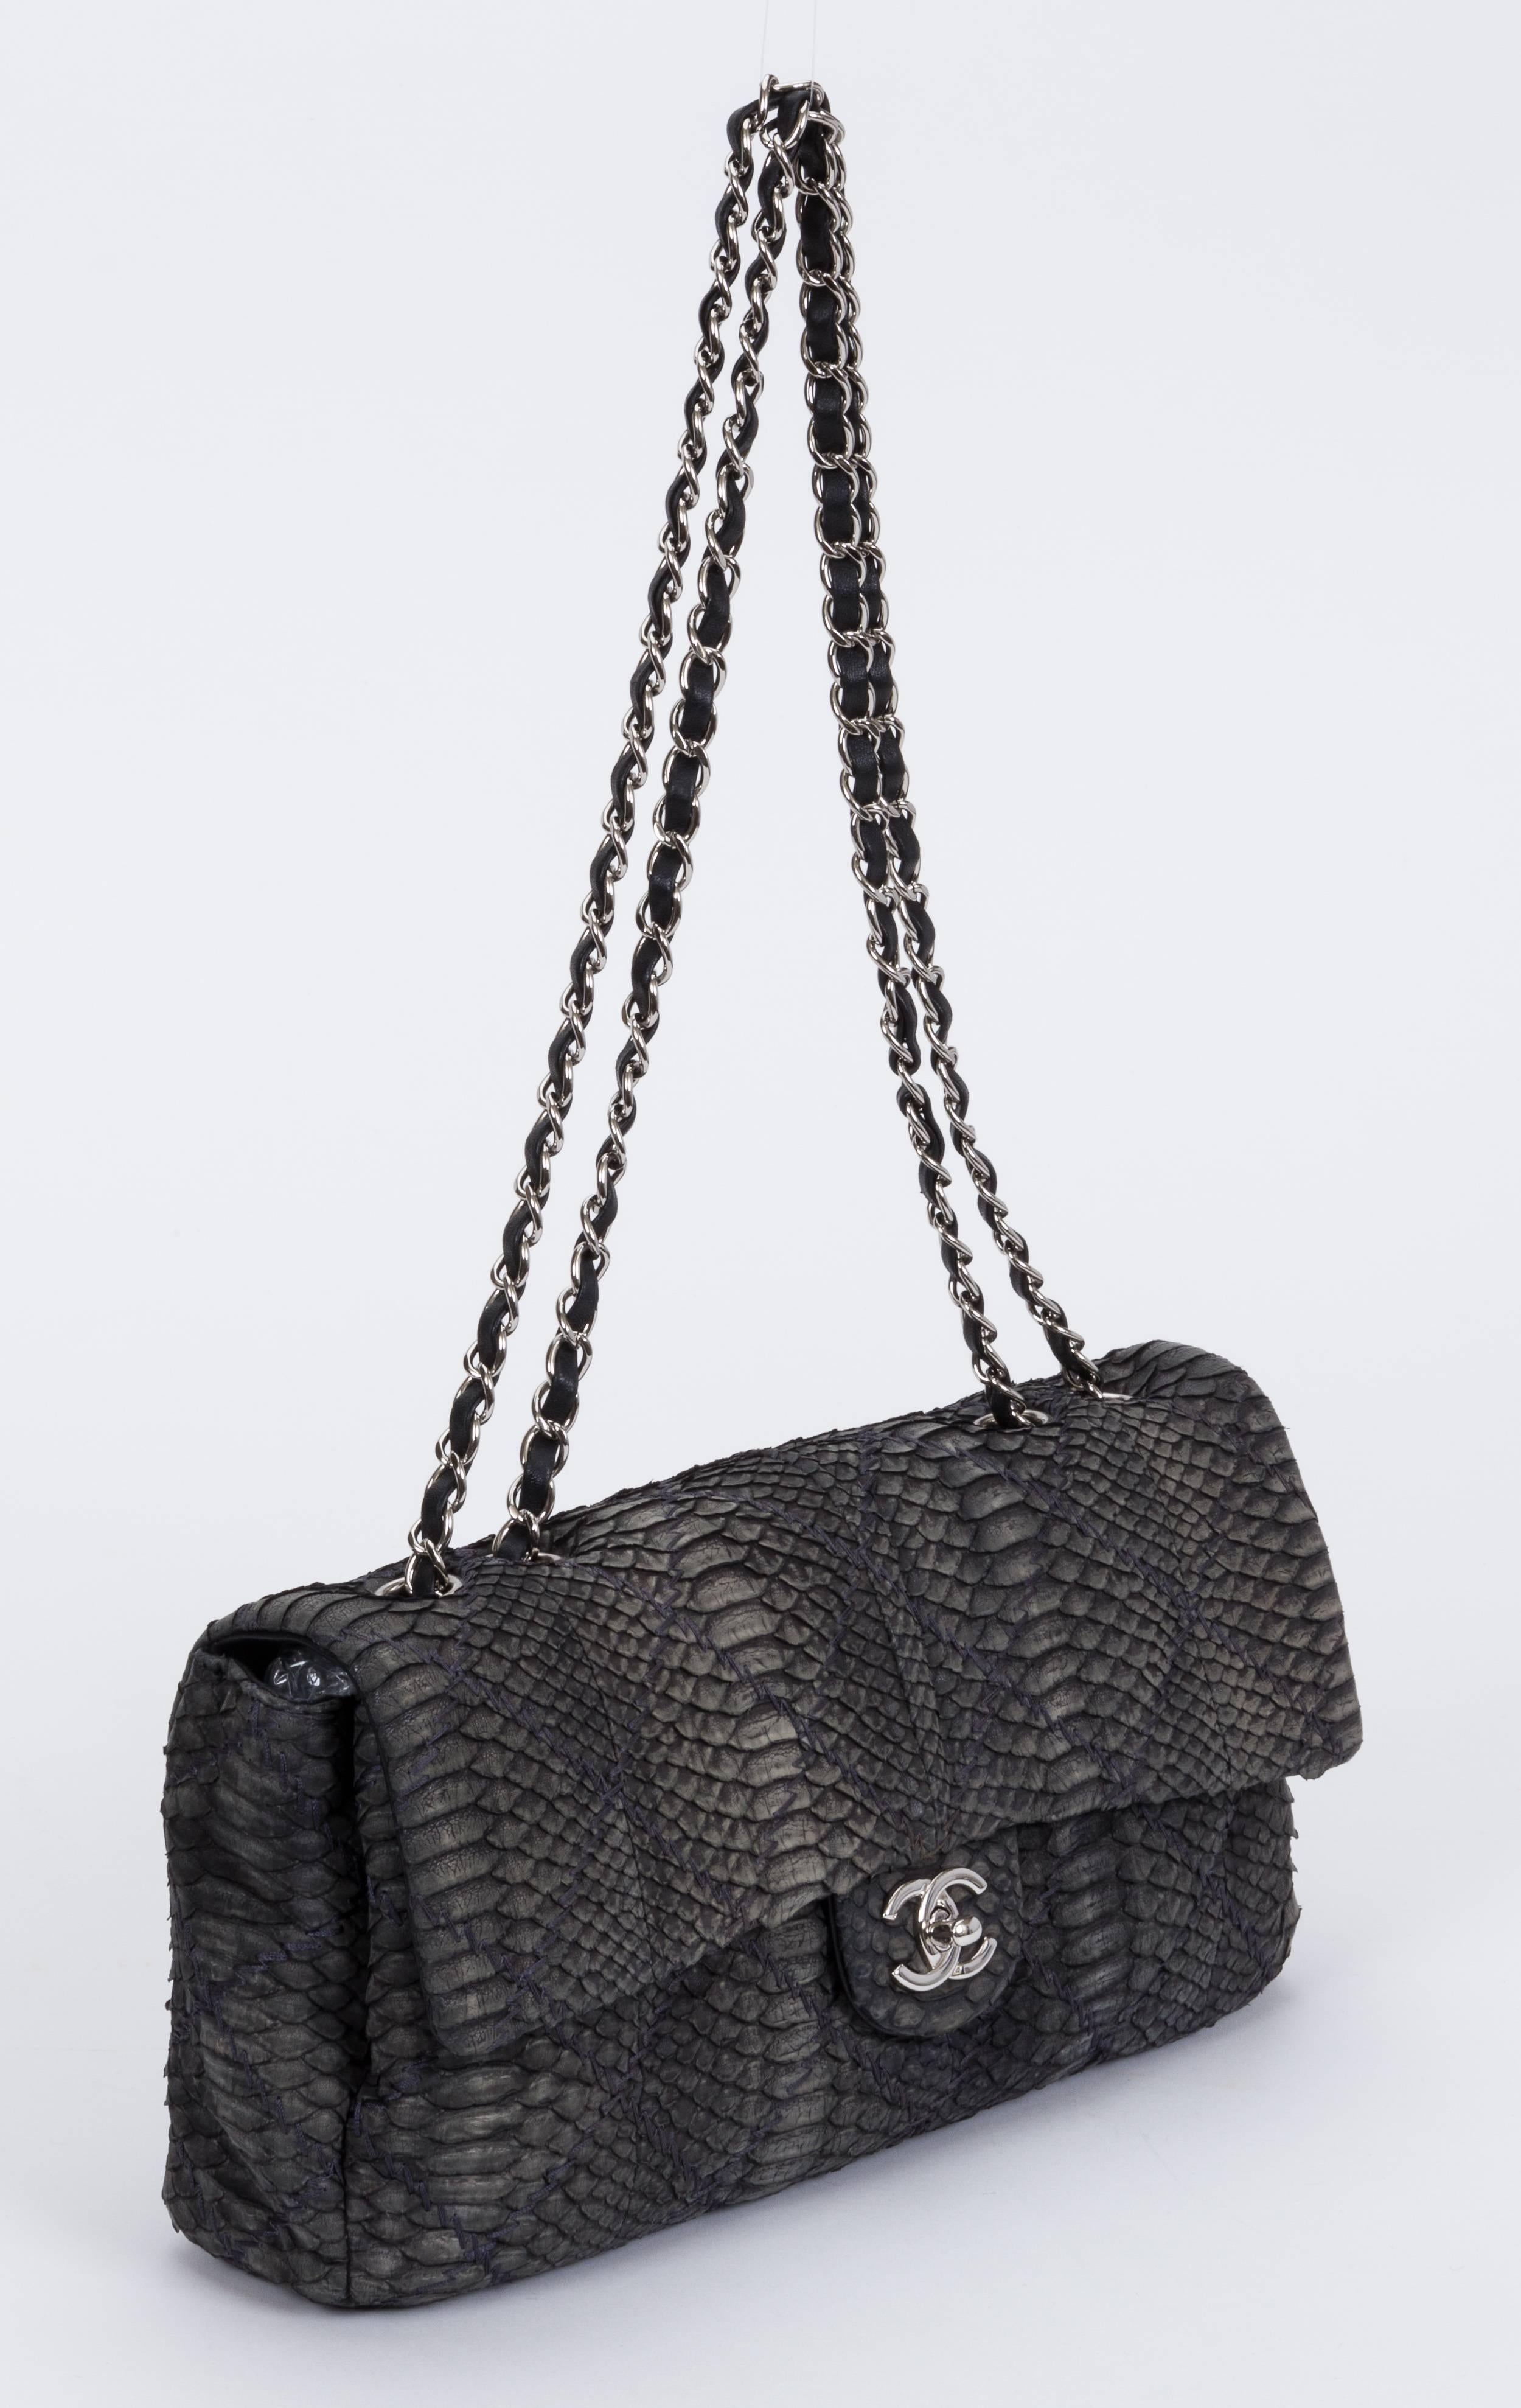 Chanel grey python single flap with two interior compartments. Black lambskin lining. Shoulder drop 12'/21', can also be worn cross body. Comes with hologram, ID card, booklet and dust cover. This item does not ship to California due to Wildlife